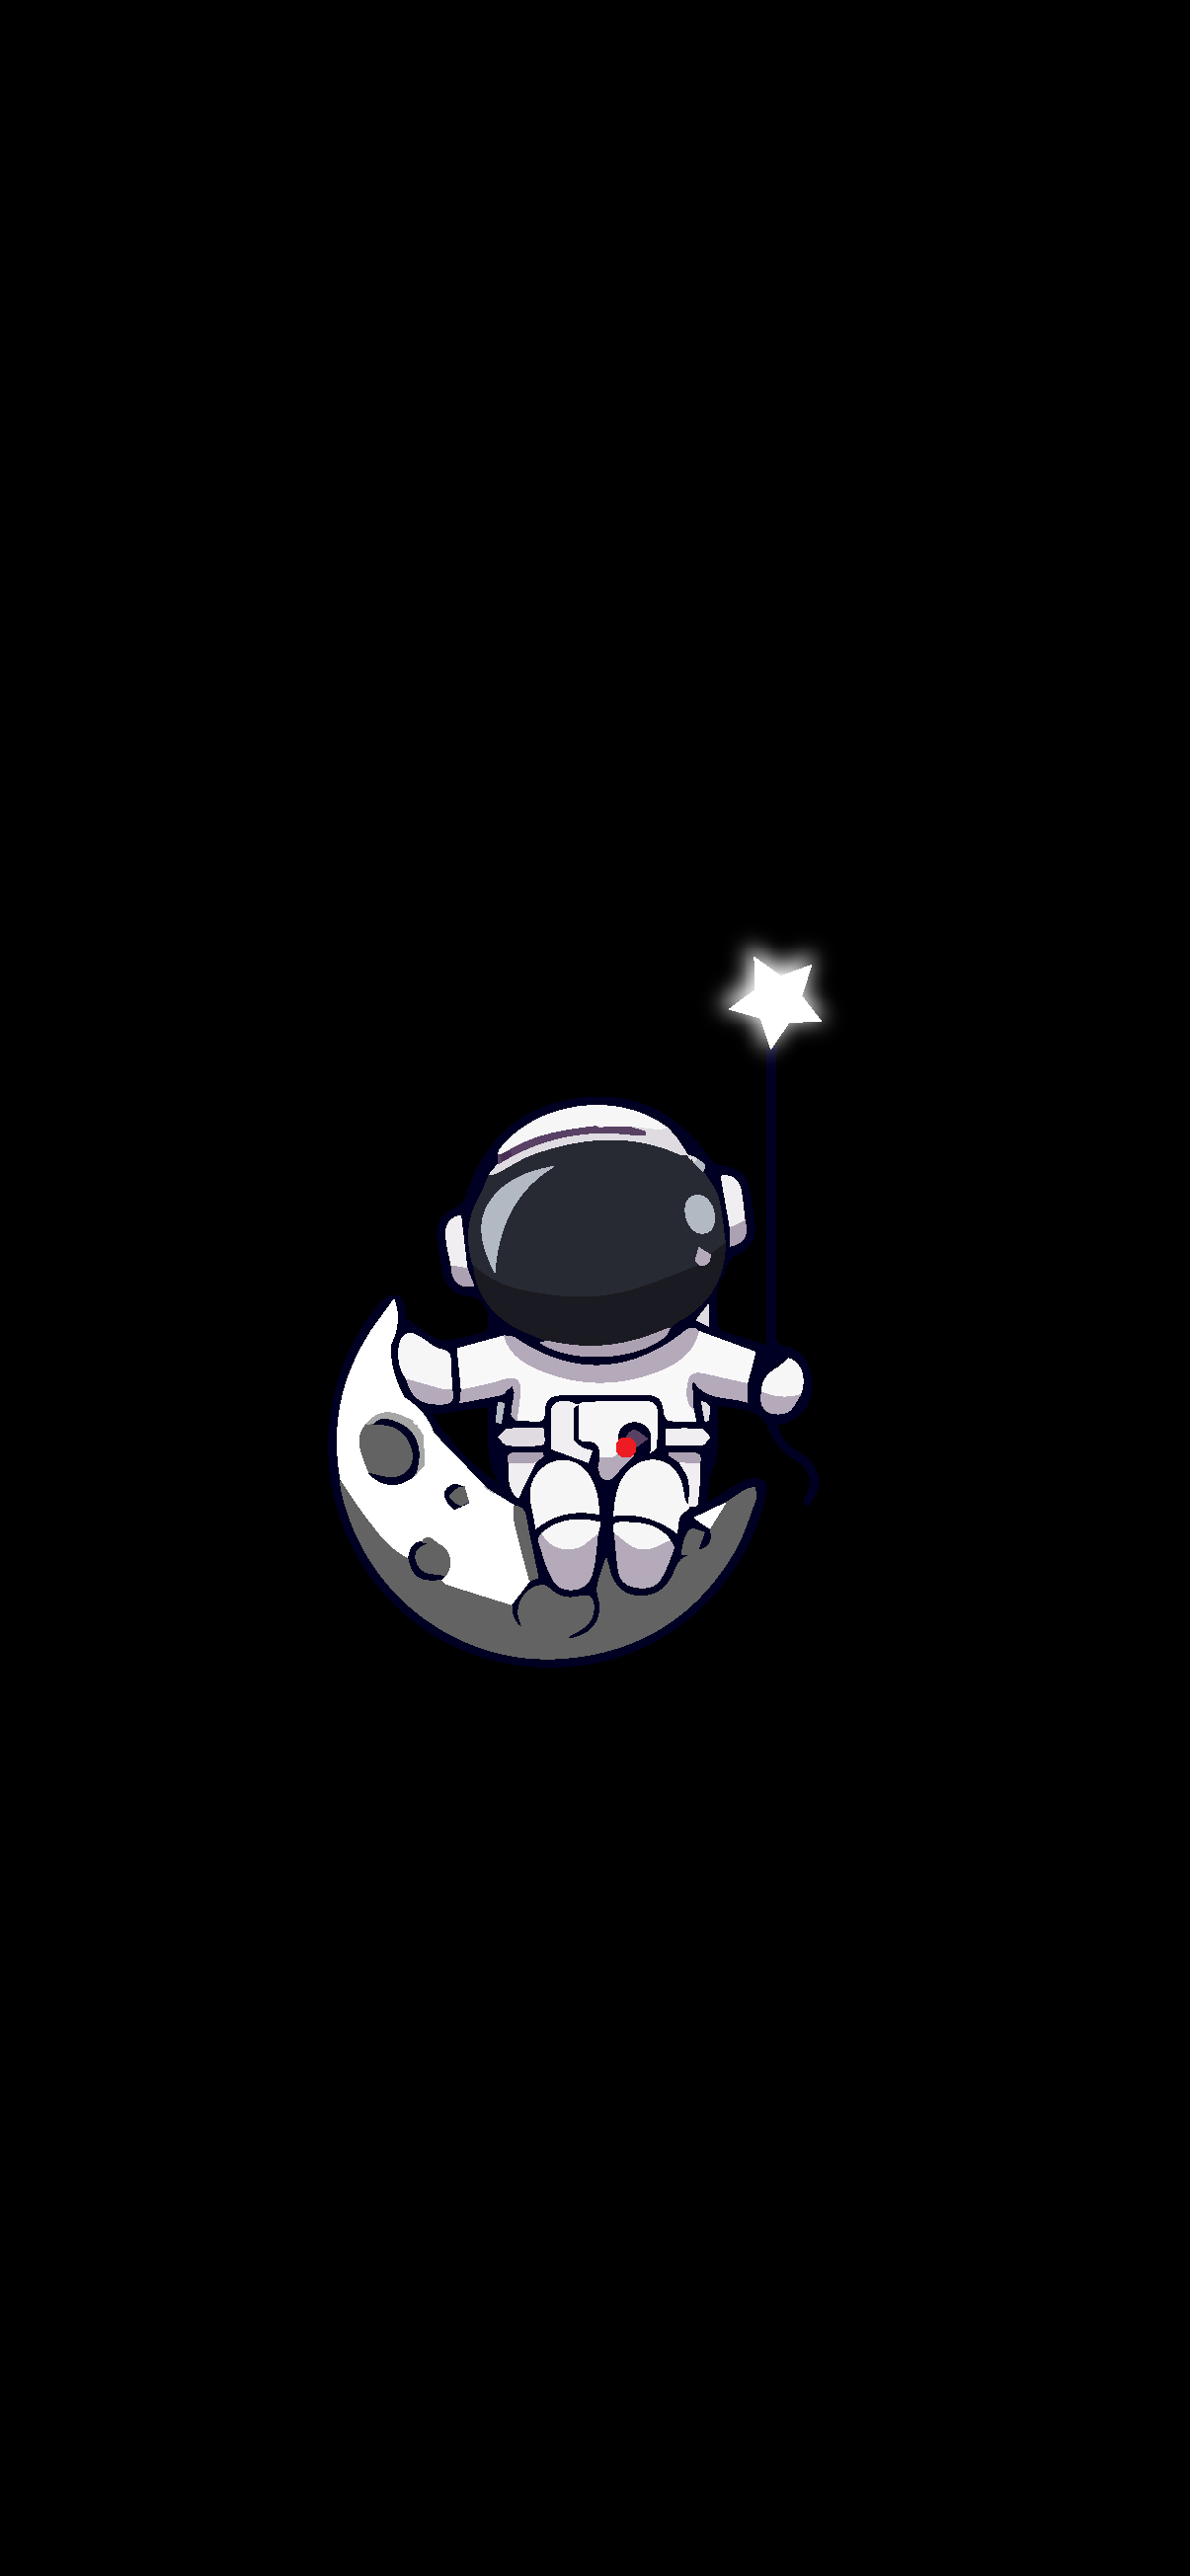 Aggregate more than 72 aesthetic astronaut wallpapers latest - in